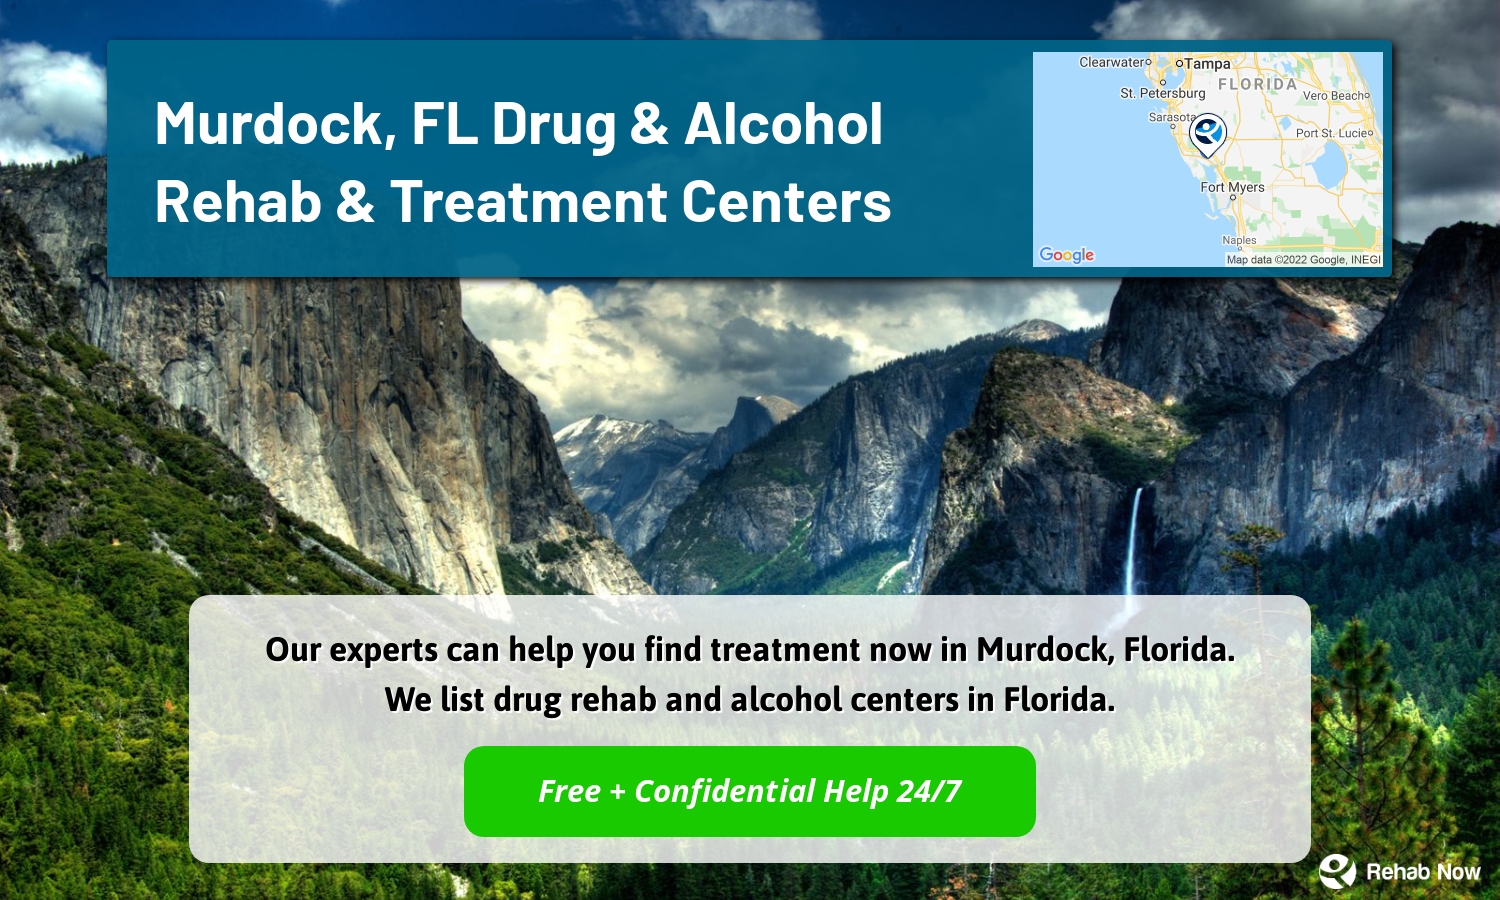 Our experts can help you find treatment now in Murdock, Florida. We list drug rehab and alcohol centers in Florida.